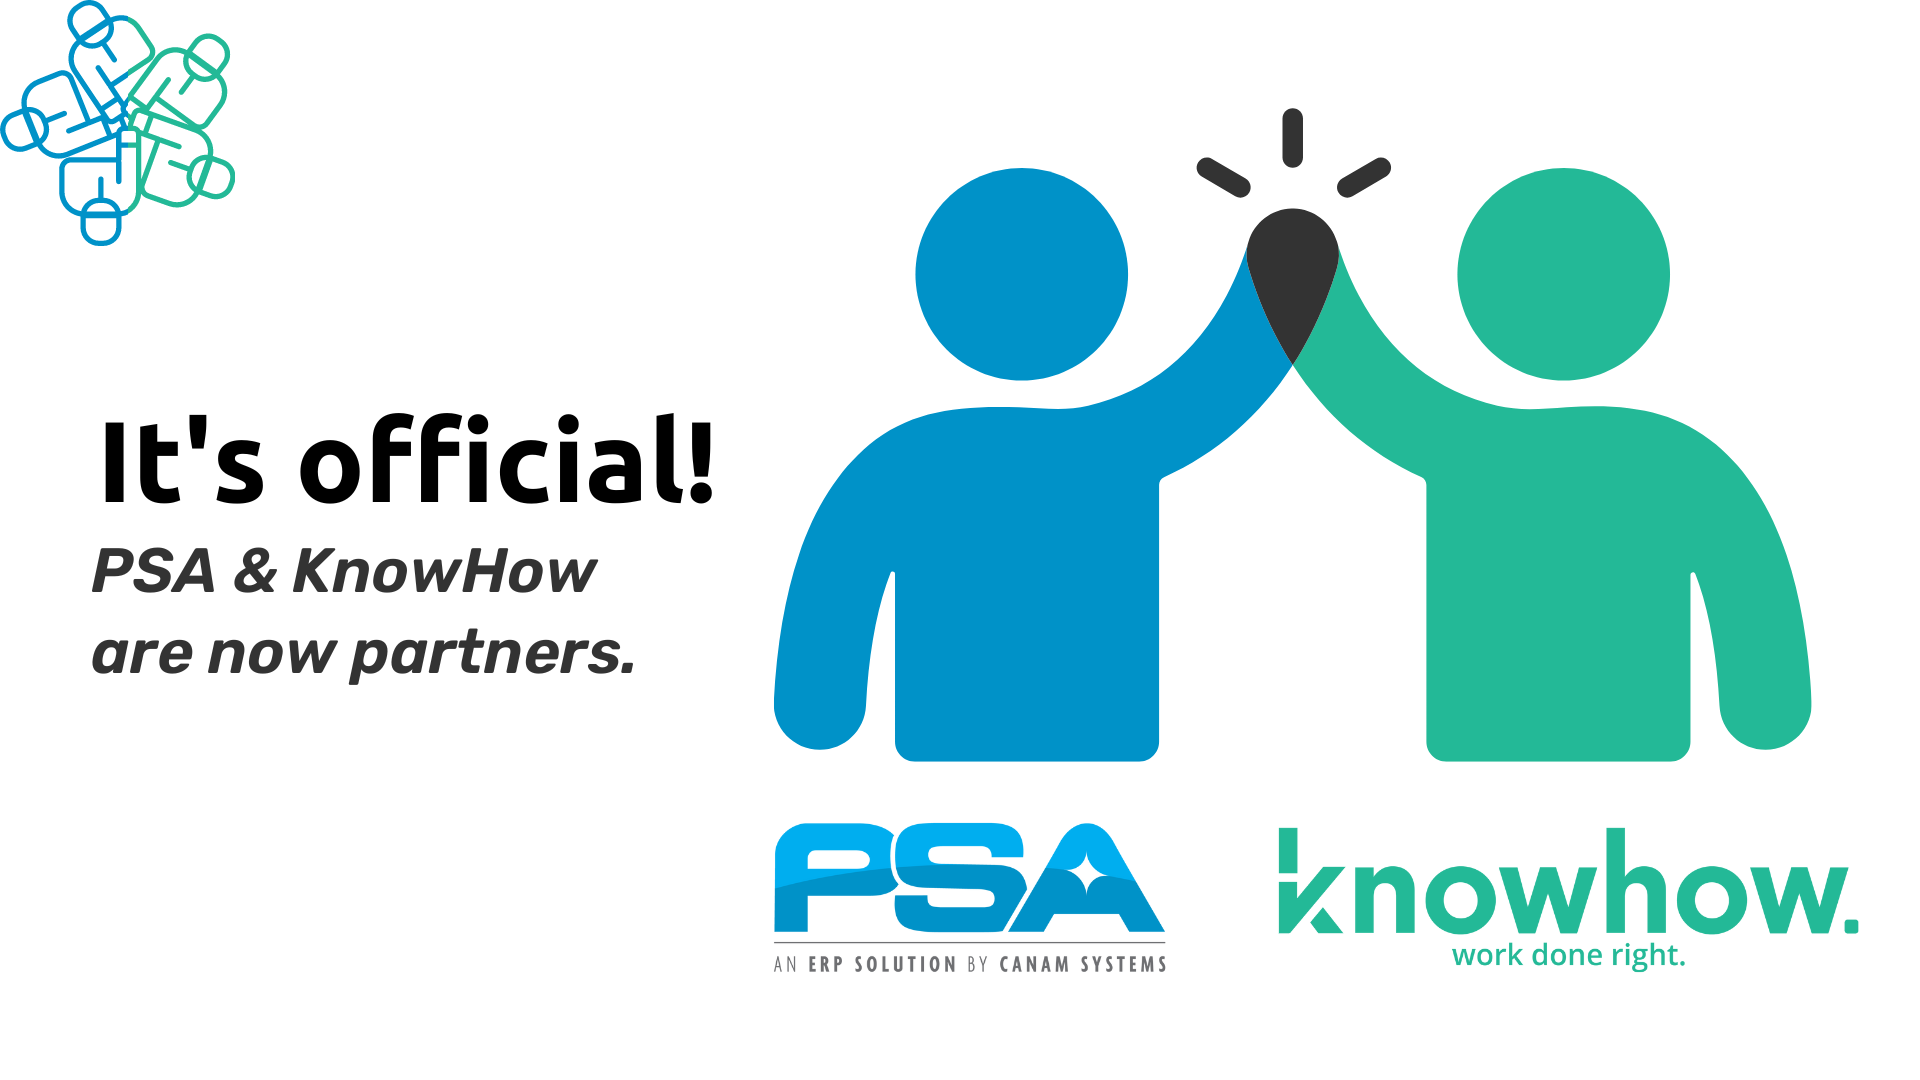 KnowHow Partners with PSA to Drive Rapid Worker Onboarding & How-to Training